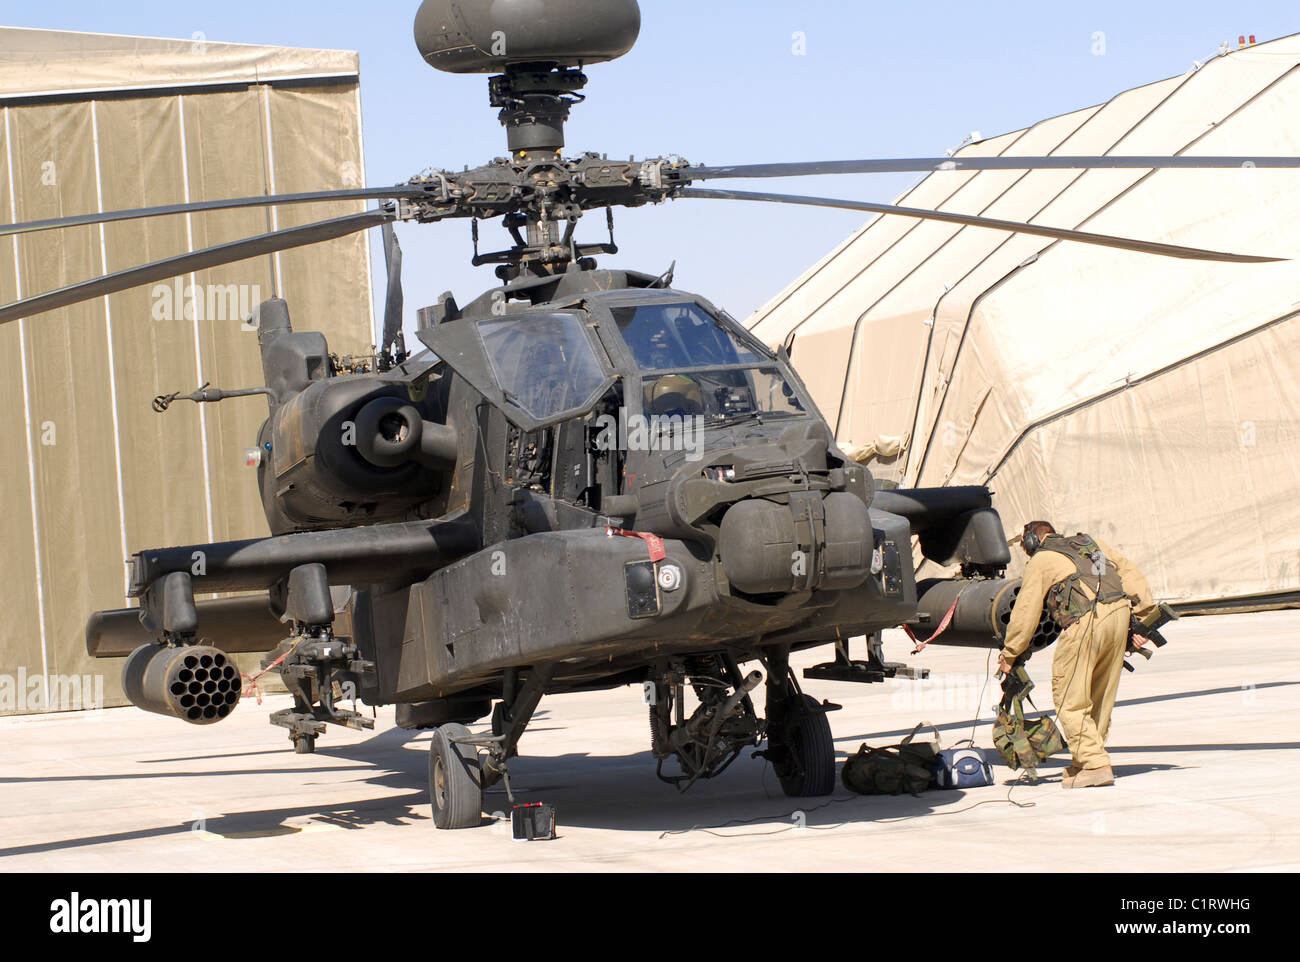 An Apache helicopter at Camp Bastion, Afghanistan. Stock Photo